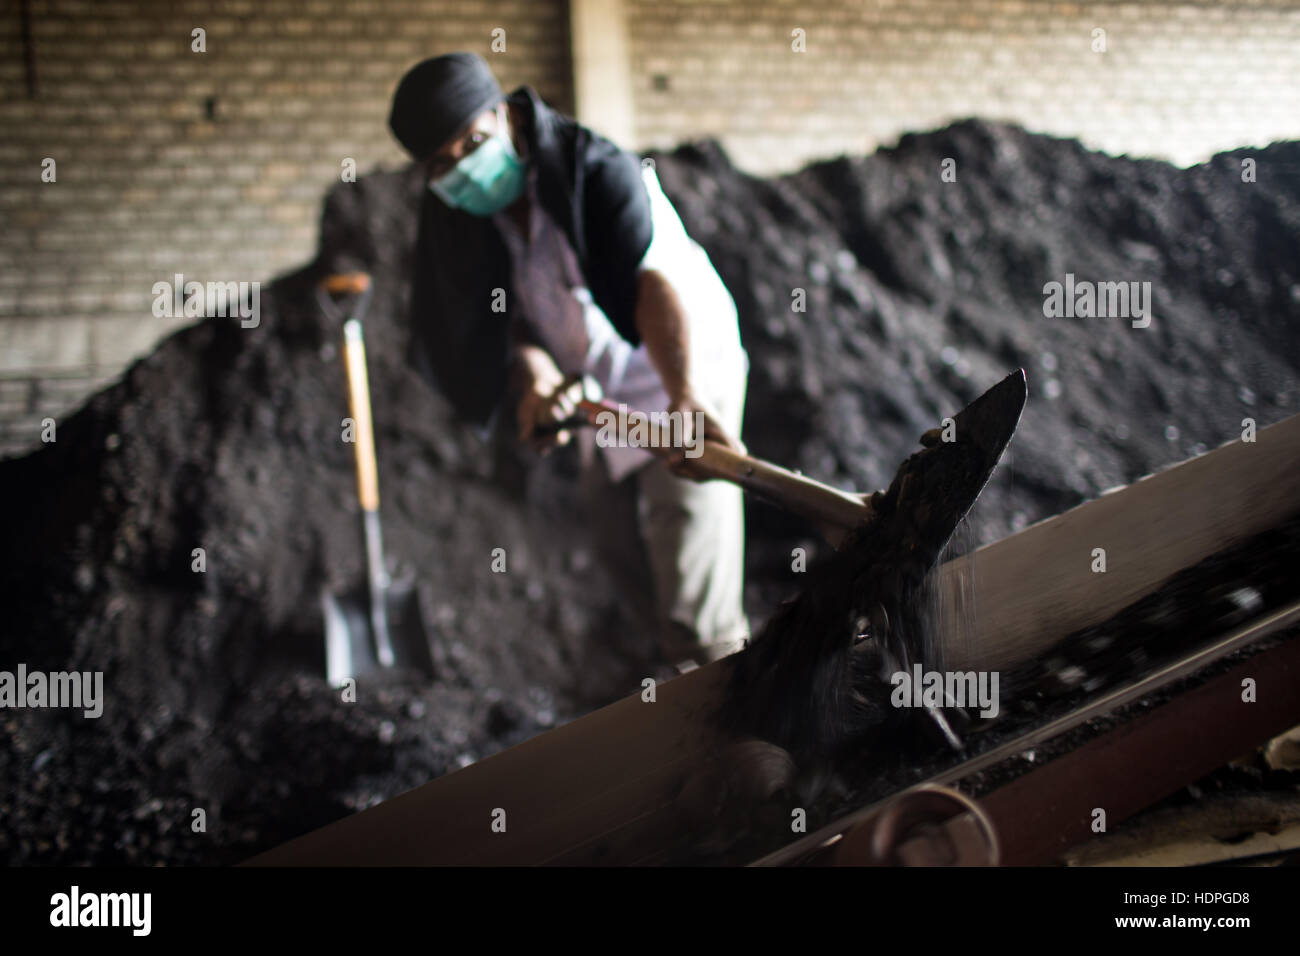 Workers shovel coal to power a boiler at a cotton dye-works in Tamil Nadu, southern India. Stock Photo